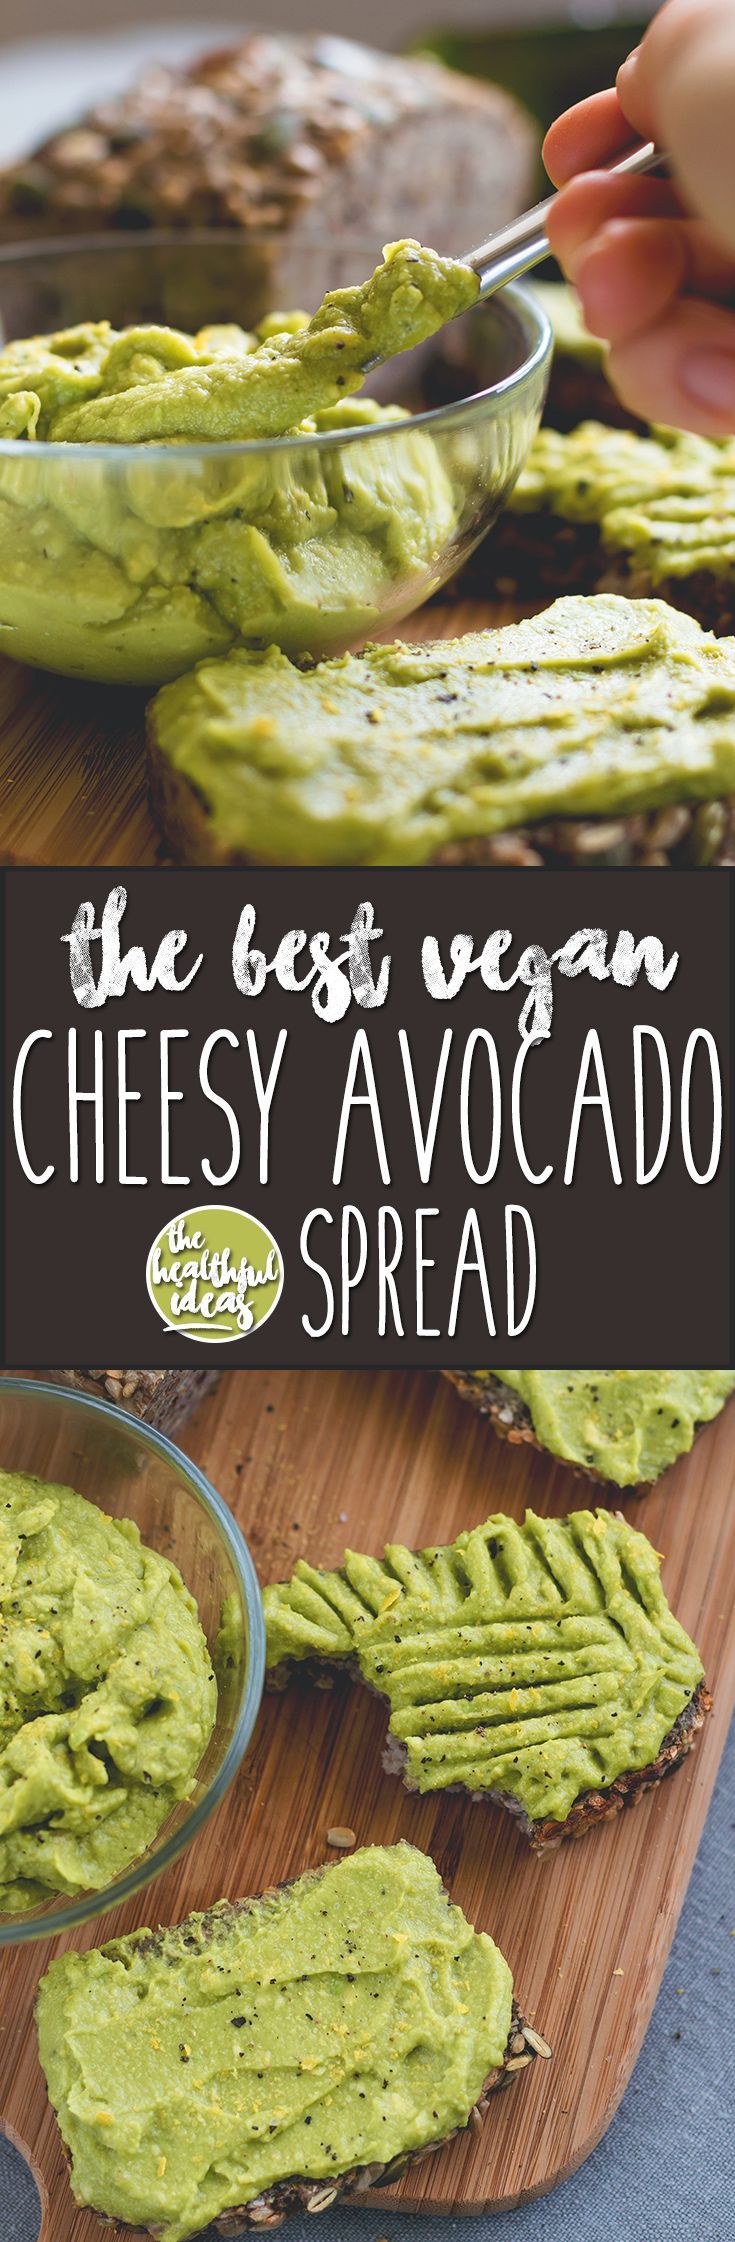 The Best Cheesy Vegan Avocado Spread – healthy and delicious spread you can whip up in a matter of minutes. I love this recipe!